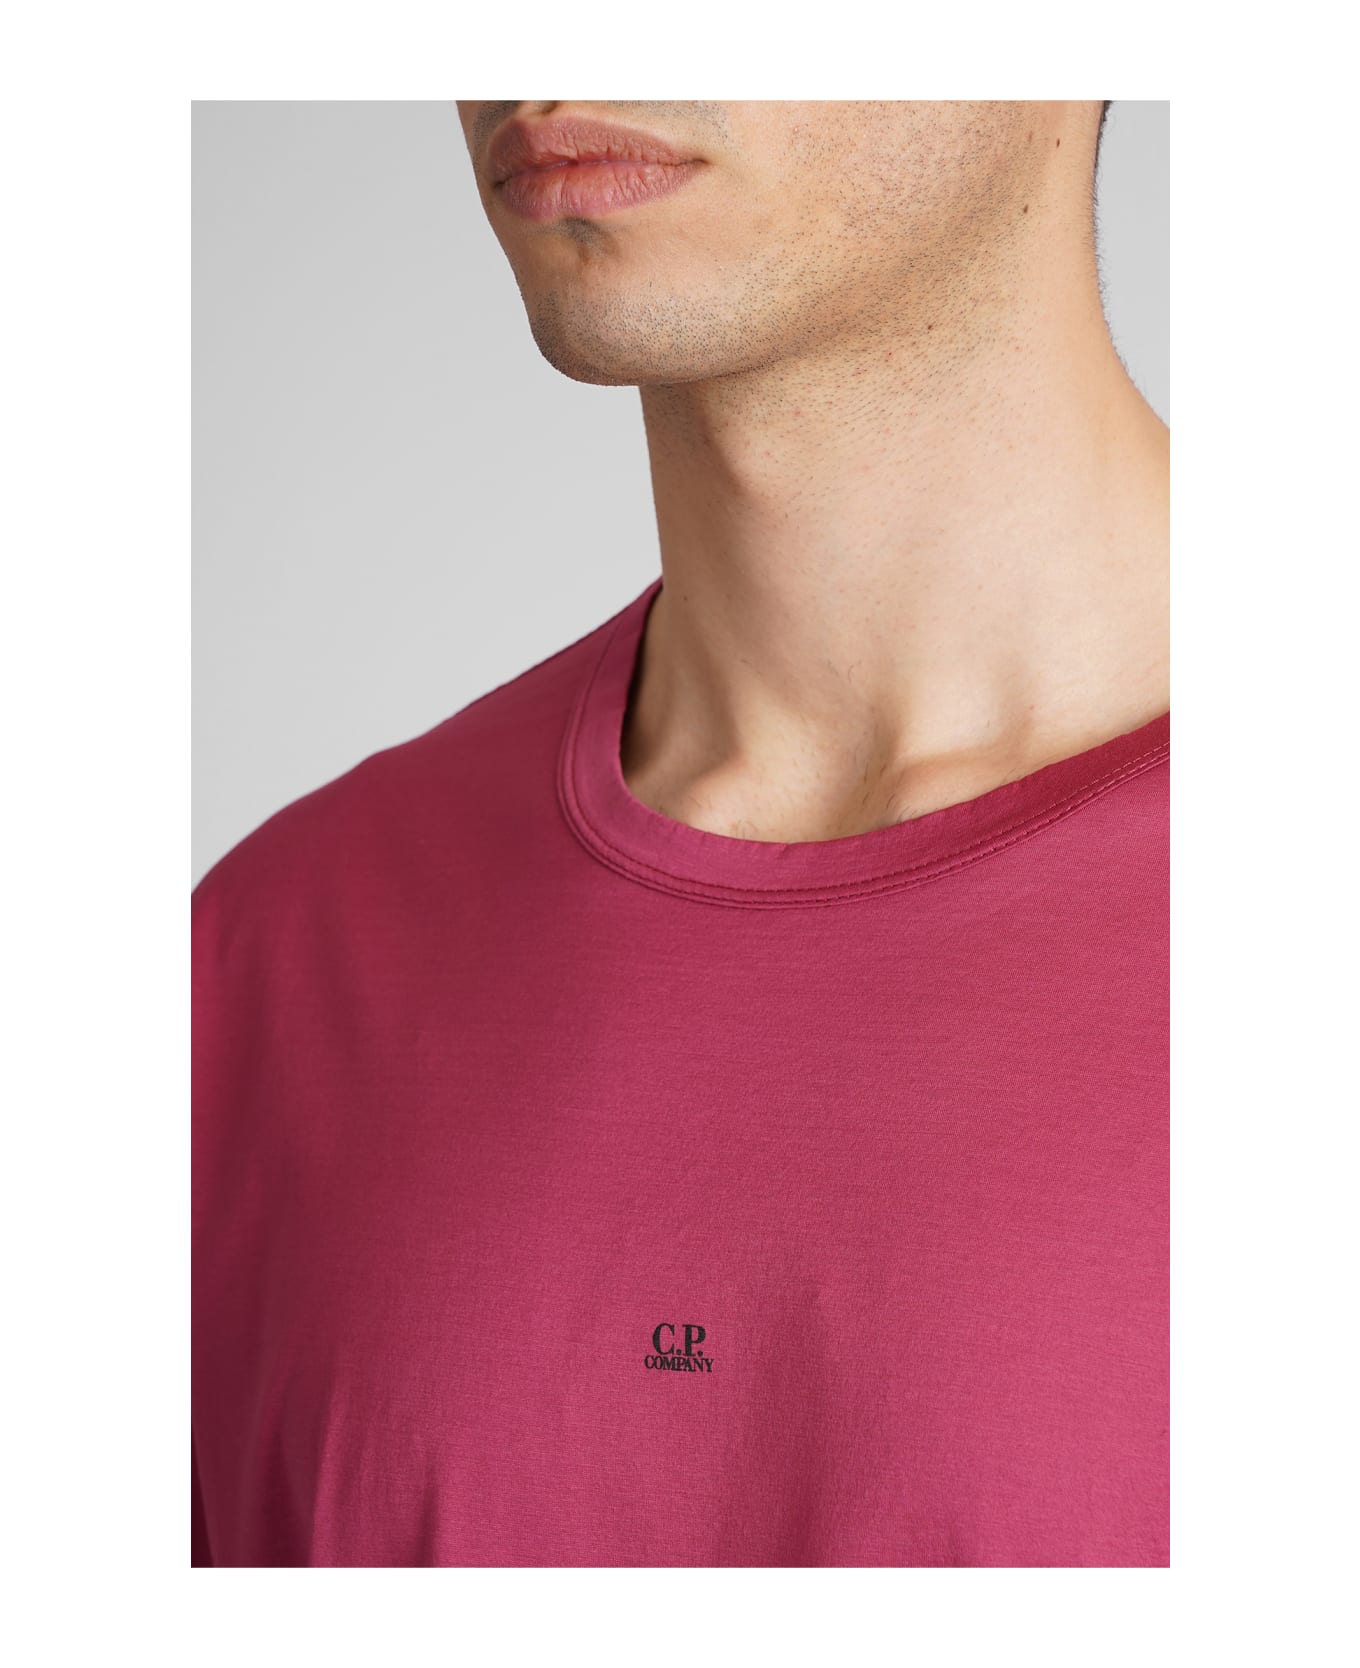 C.P. Company T-shirt In Red Cotton - red